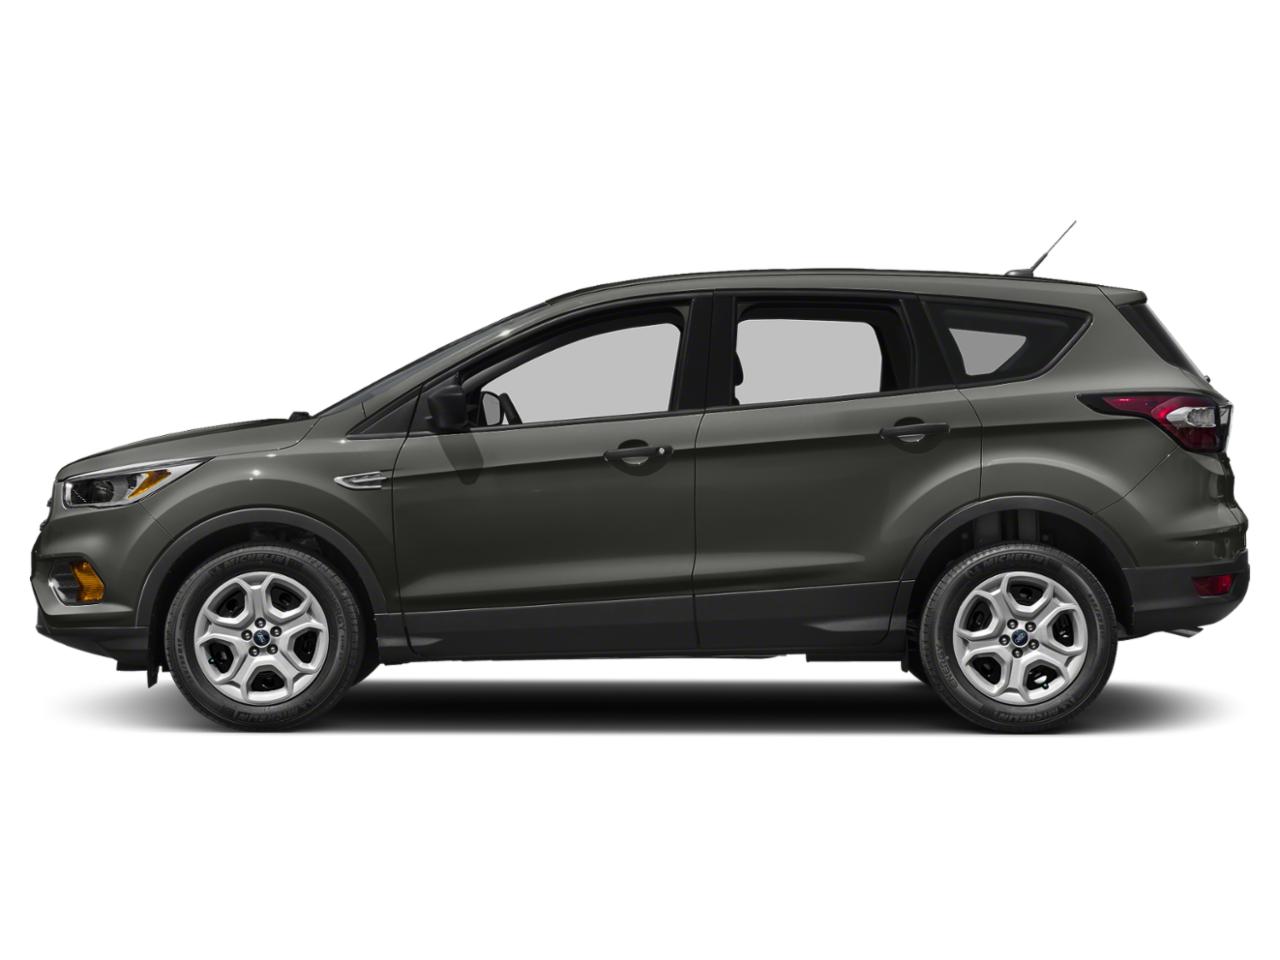 Used 2019 Ford Escape SEL with VIN 1FMCU9HD4KUC03381 for sale in Nevada, MO